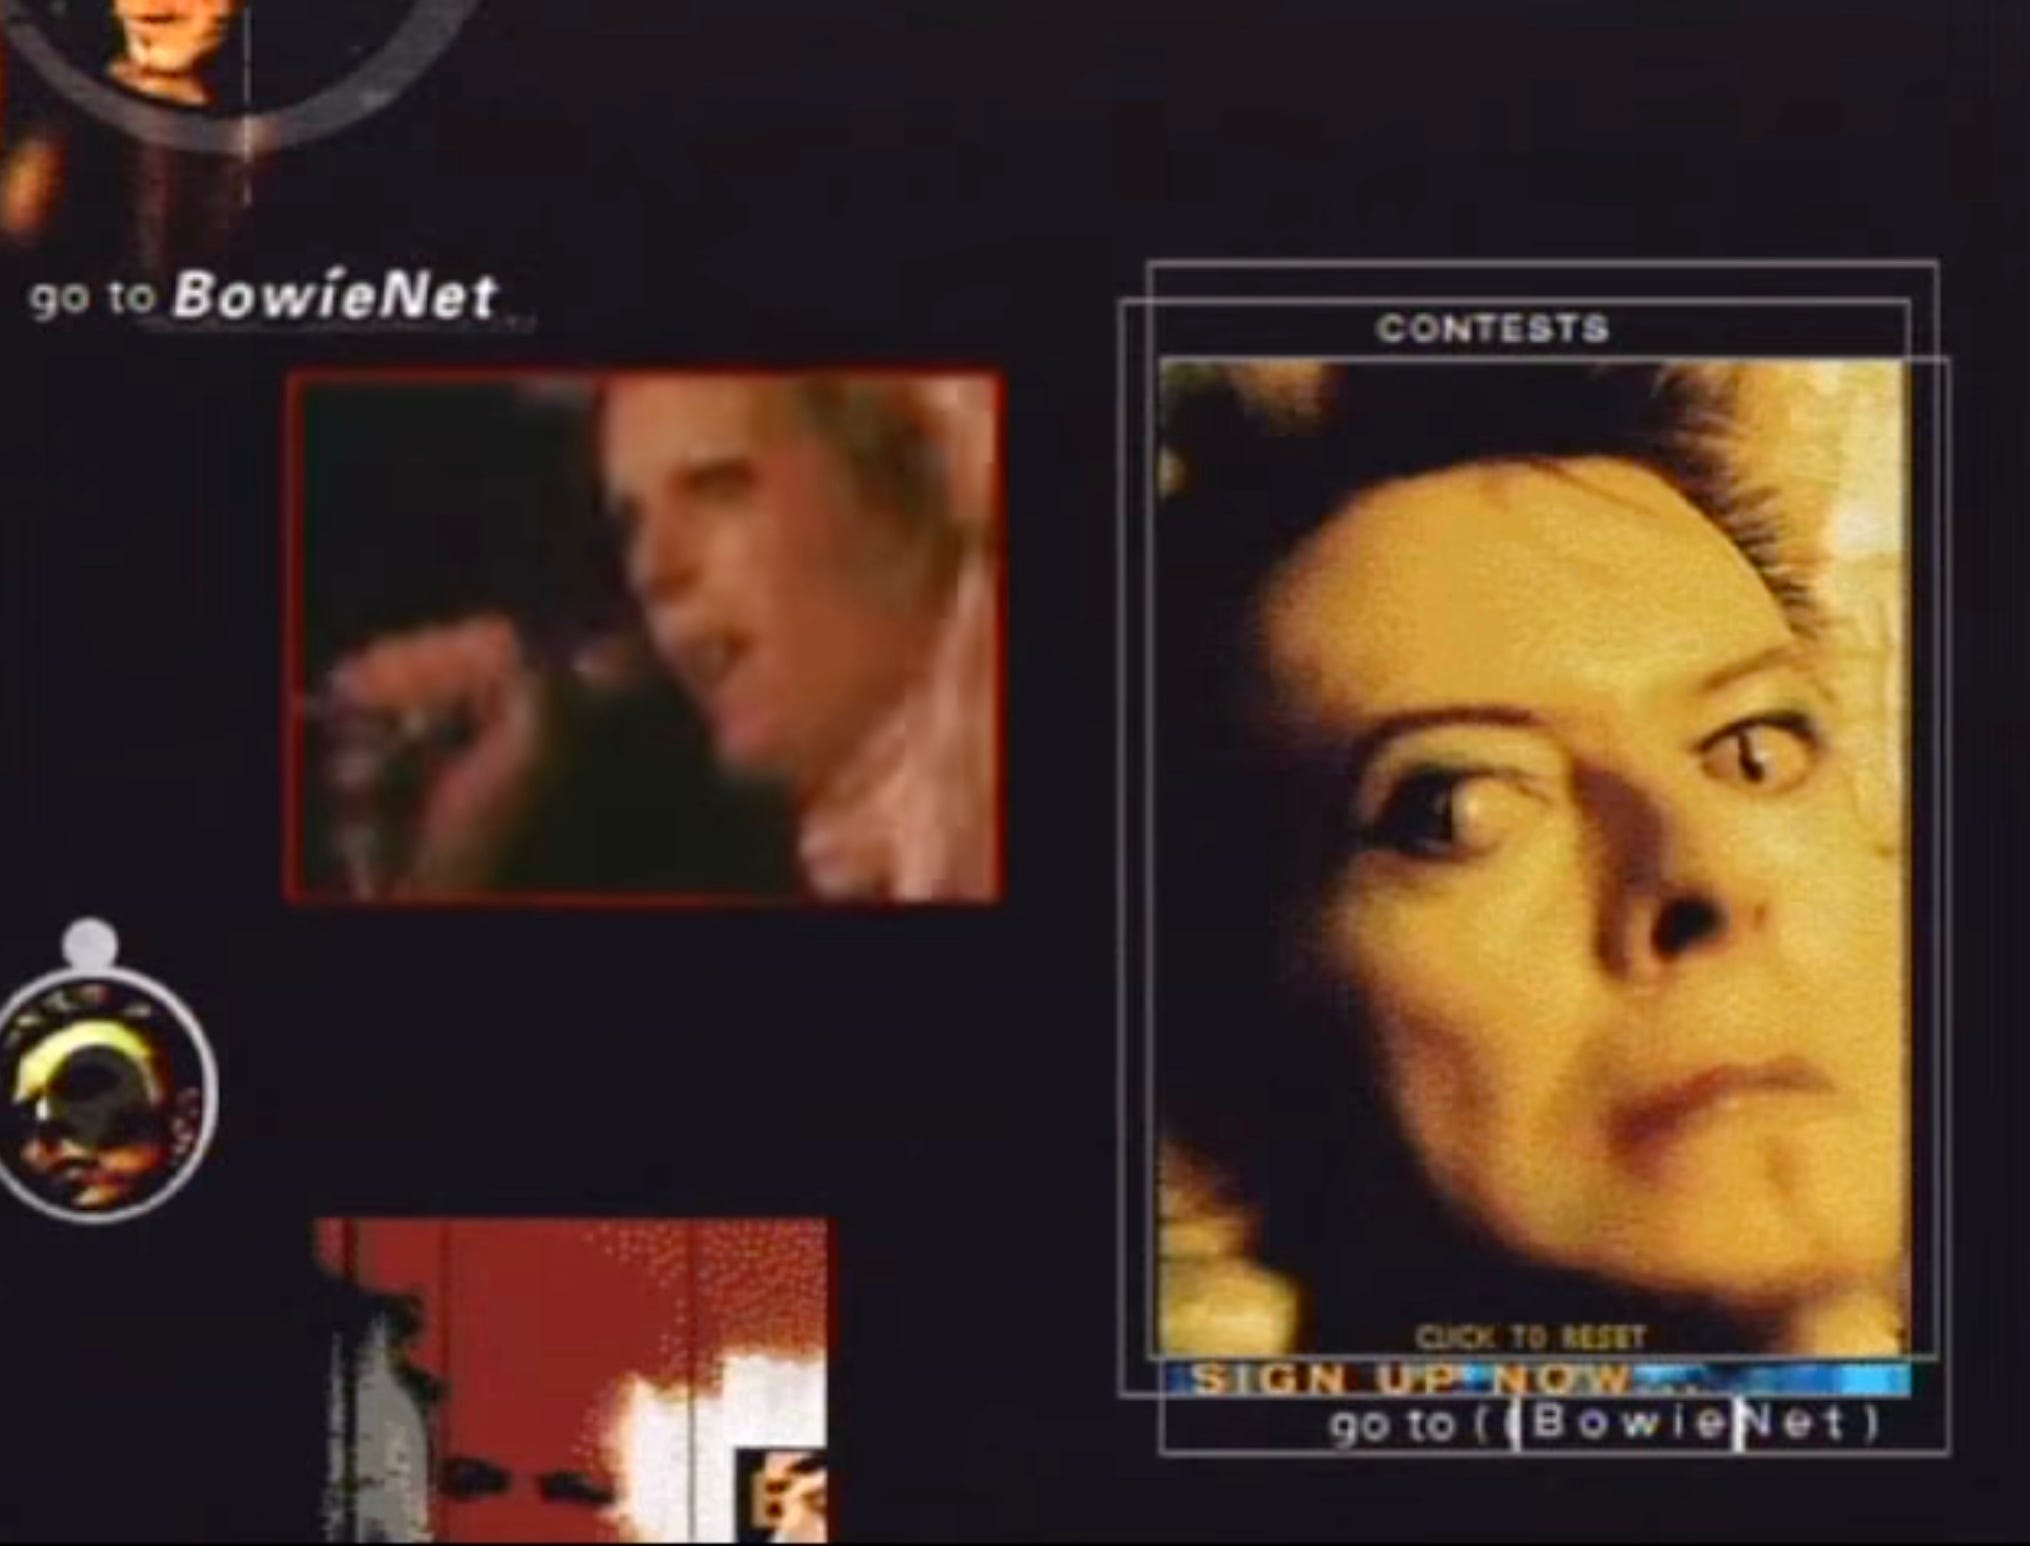 The Lab Report 13 - David Bowie, Rolling Stone and Music Web3 Education